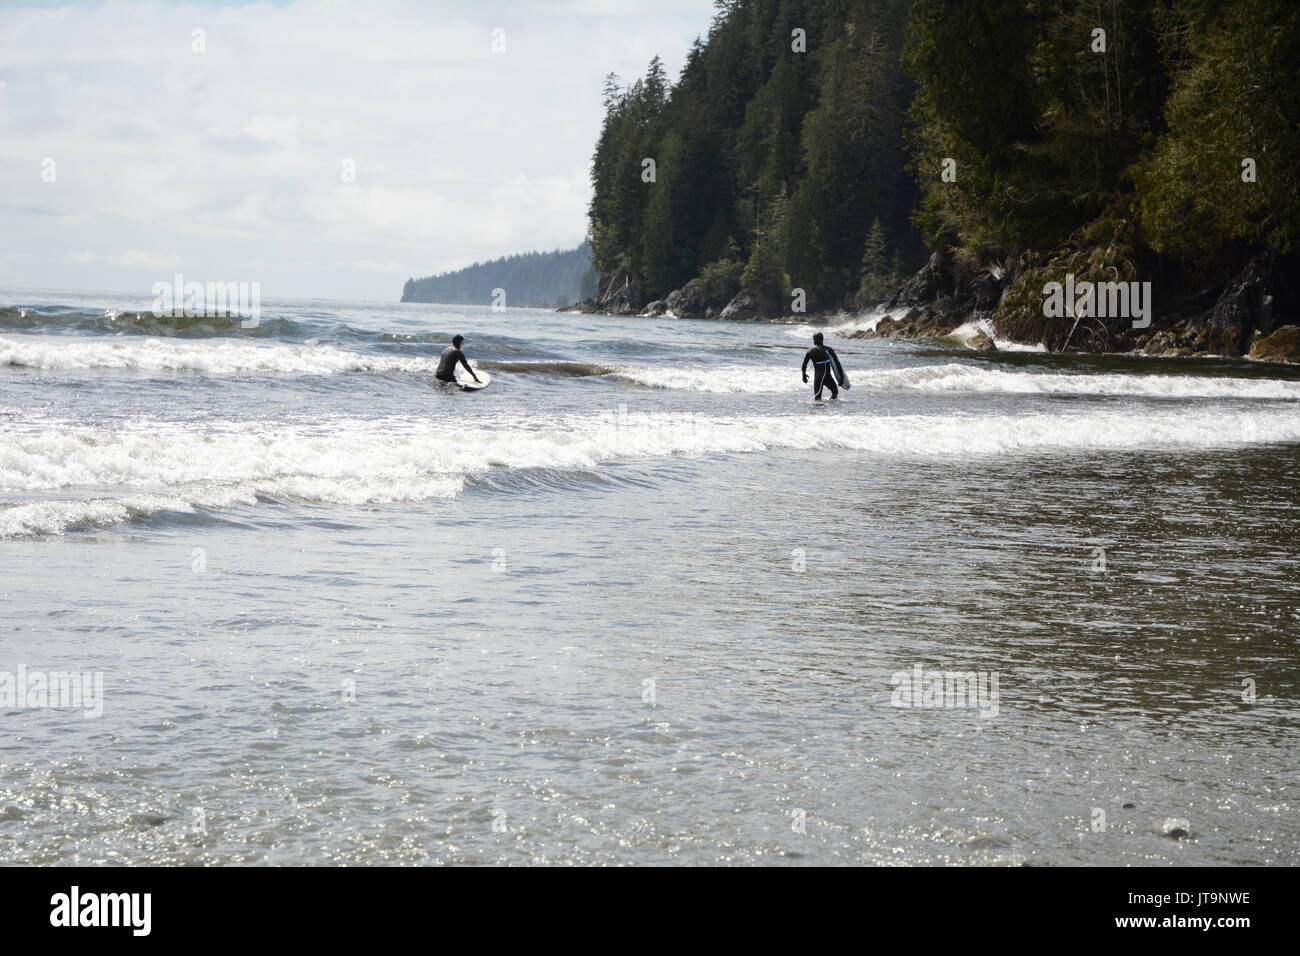 A pair of surfers on Pacheedaht Beach, on a native reserve of the same name, near Port Renfrew, Vancouver Island, British Columbia, Canada. Stock Photo